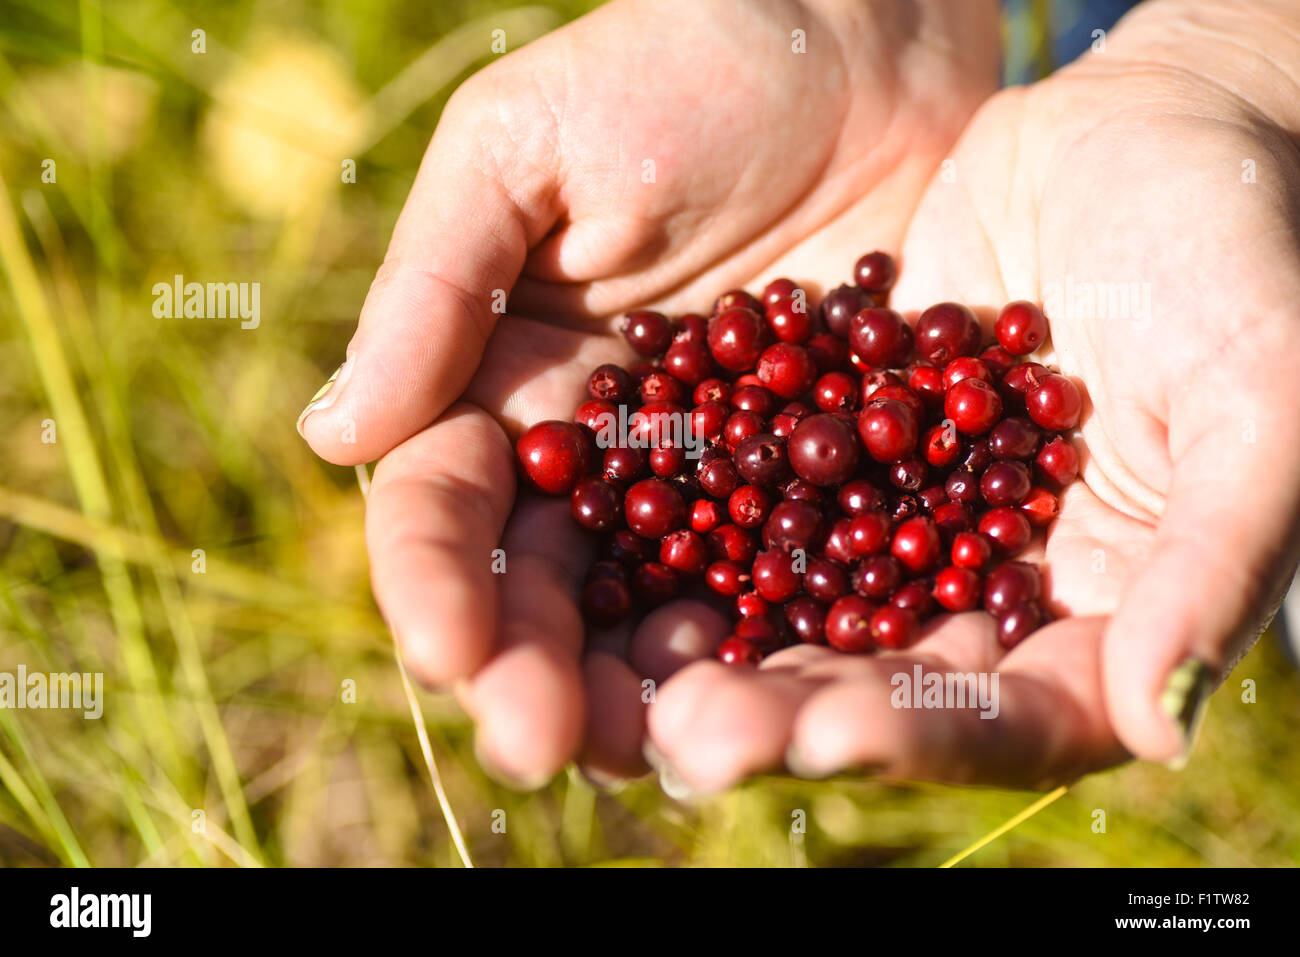 Bright red, ripe cranberries in outstretched hands Stock Photo